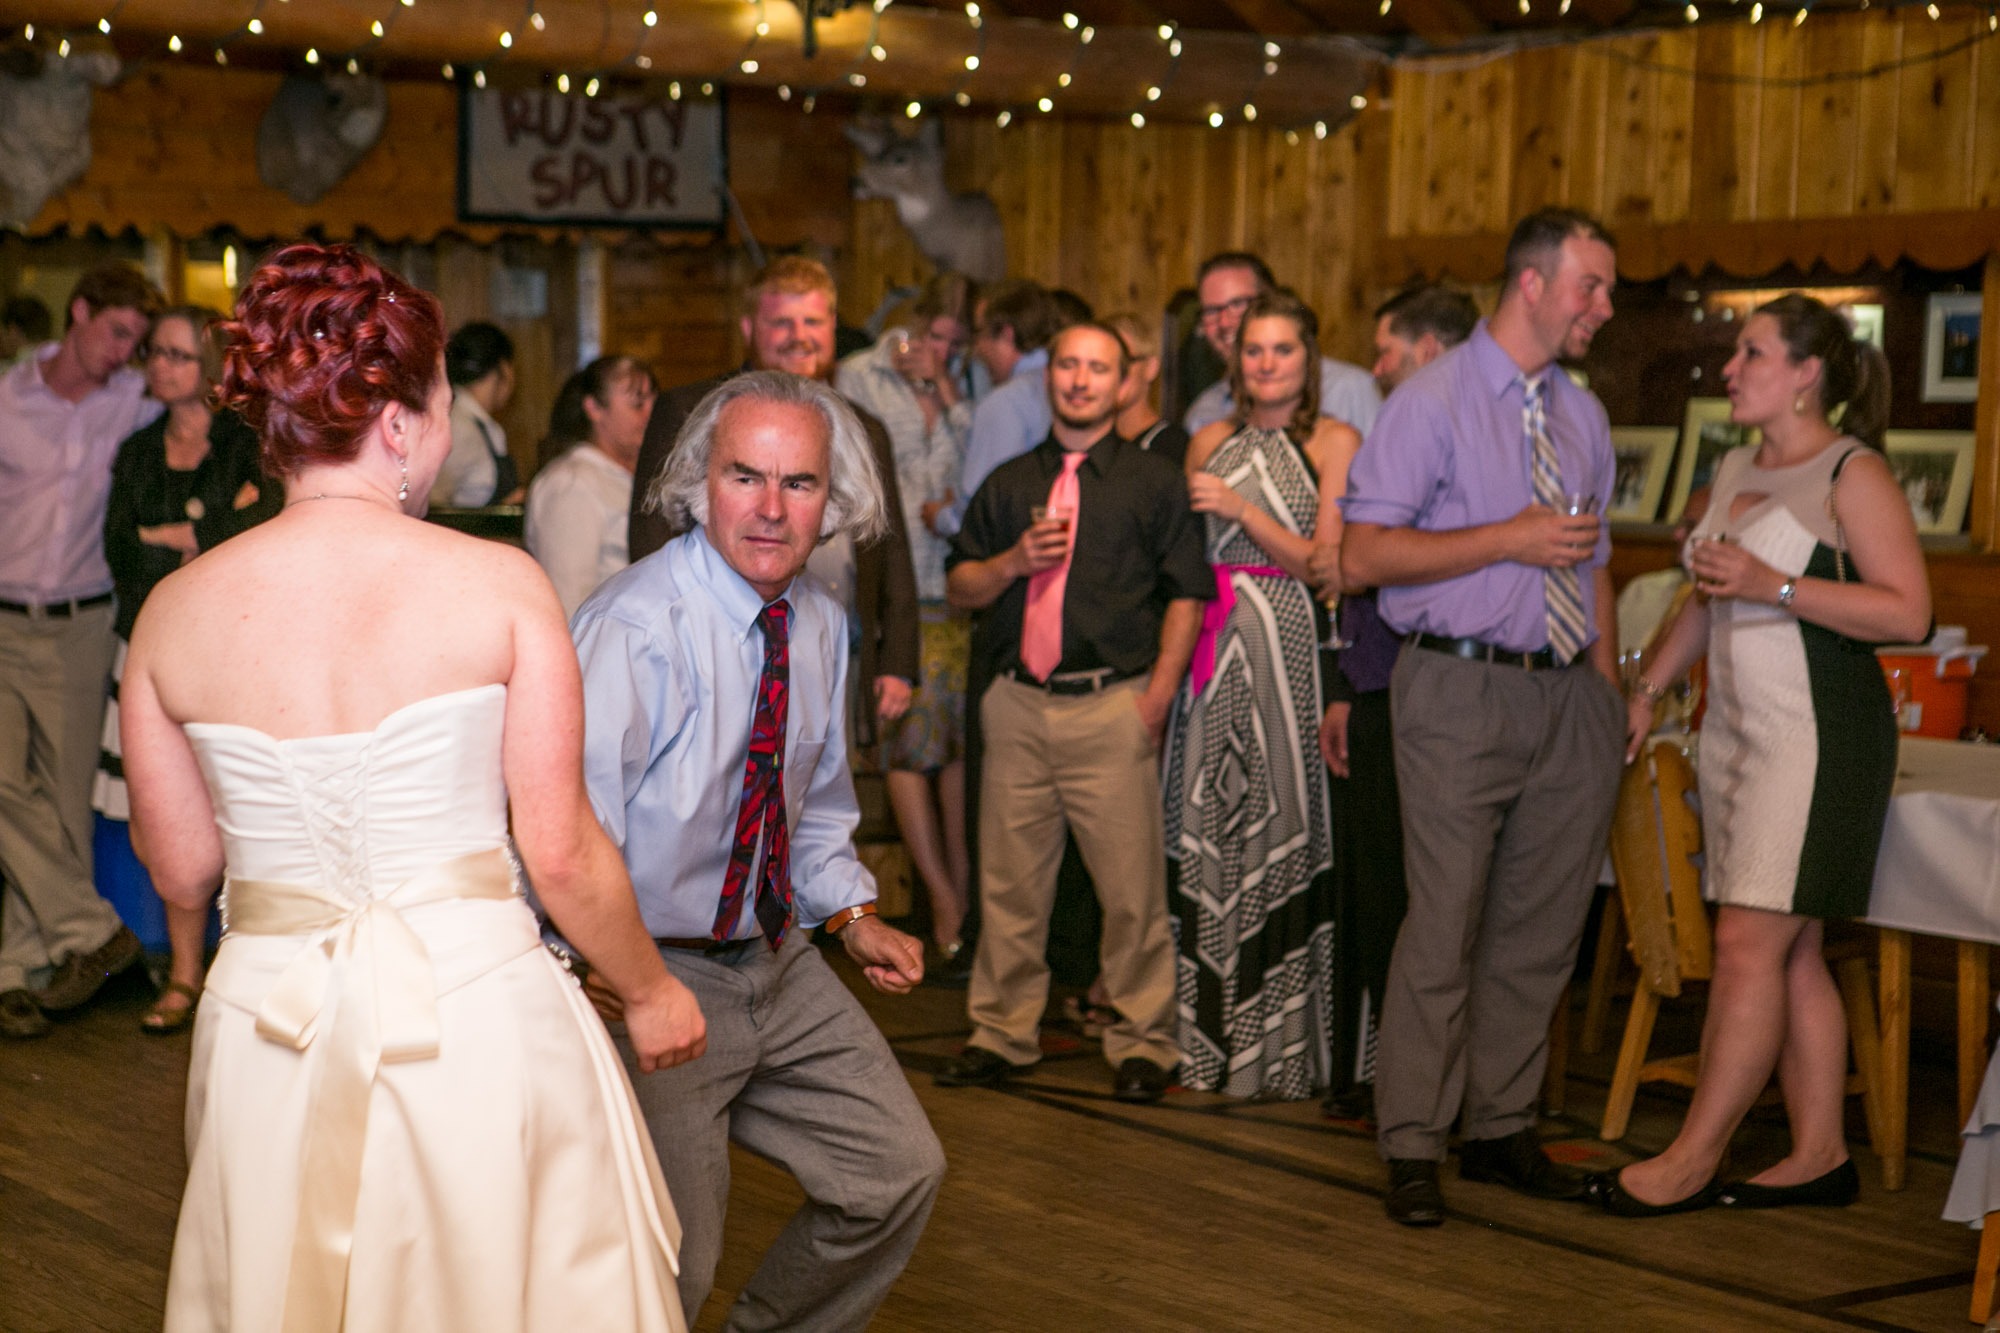 a father dances with his daughter the bride as wedding guests watch